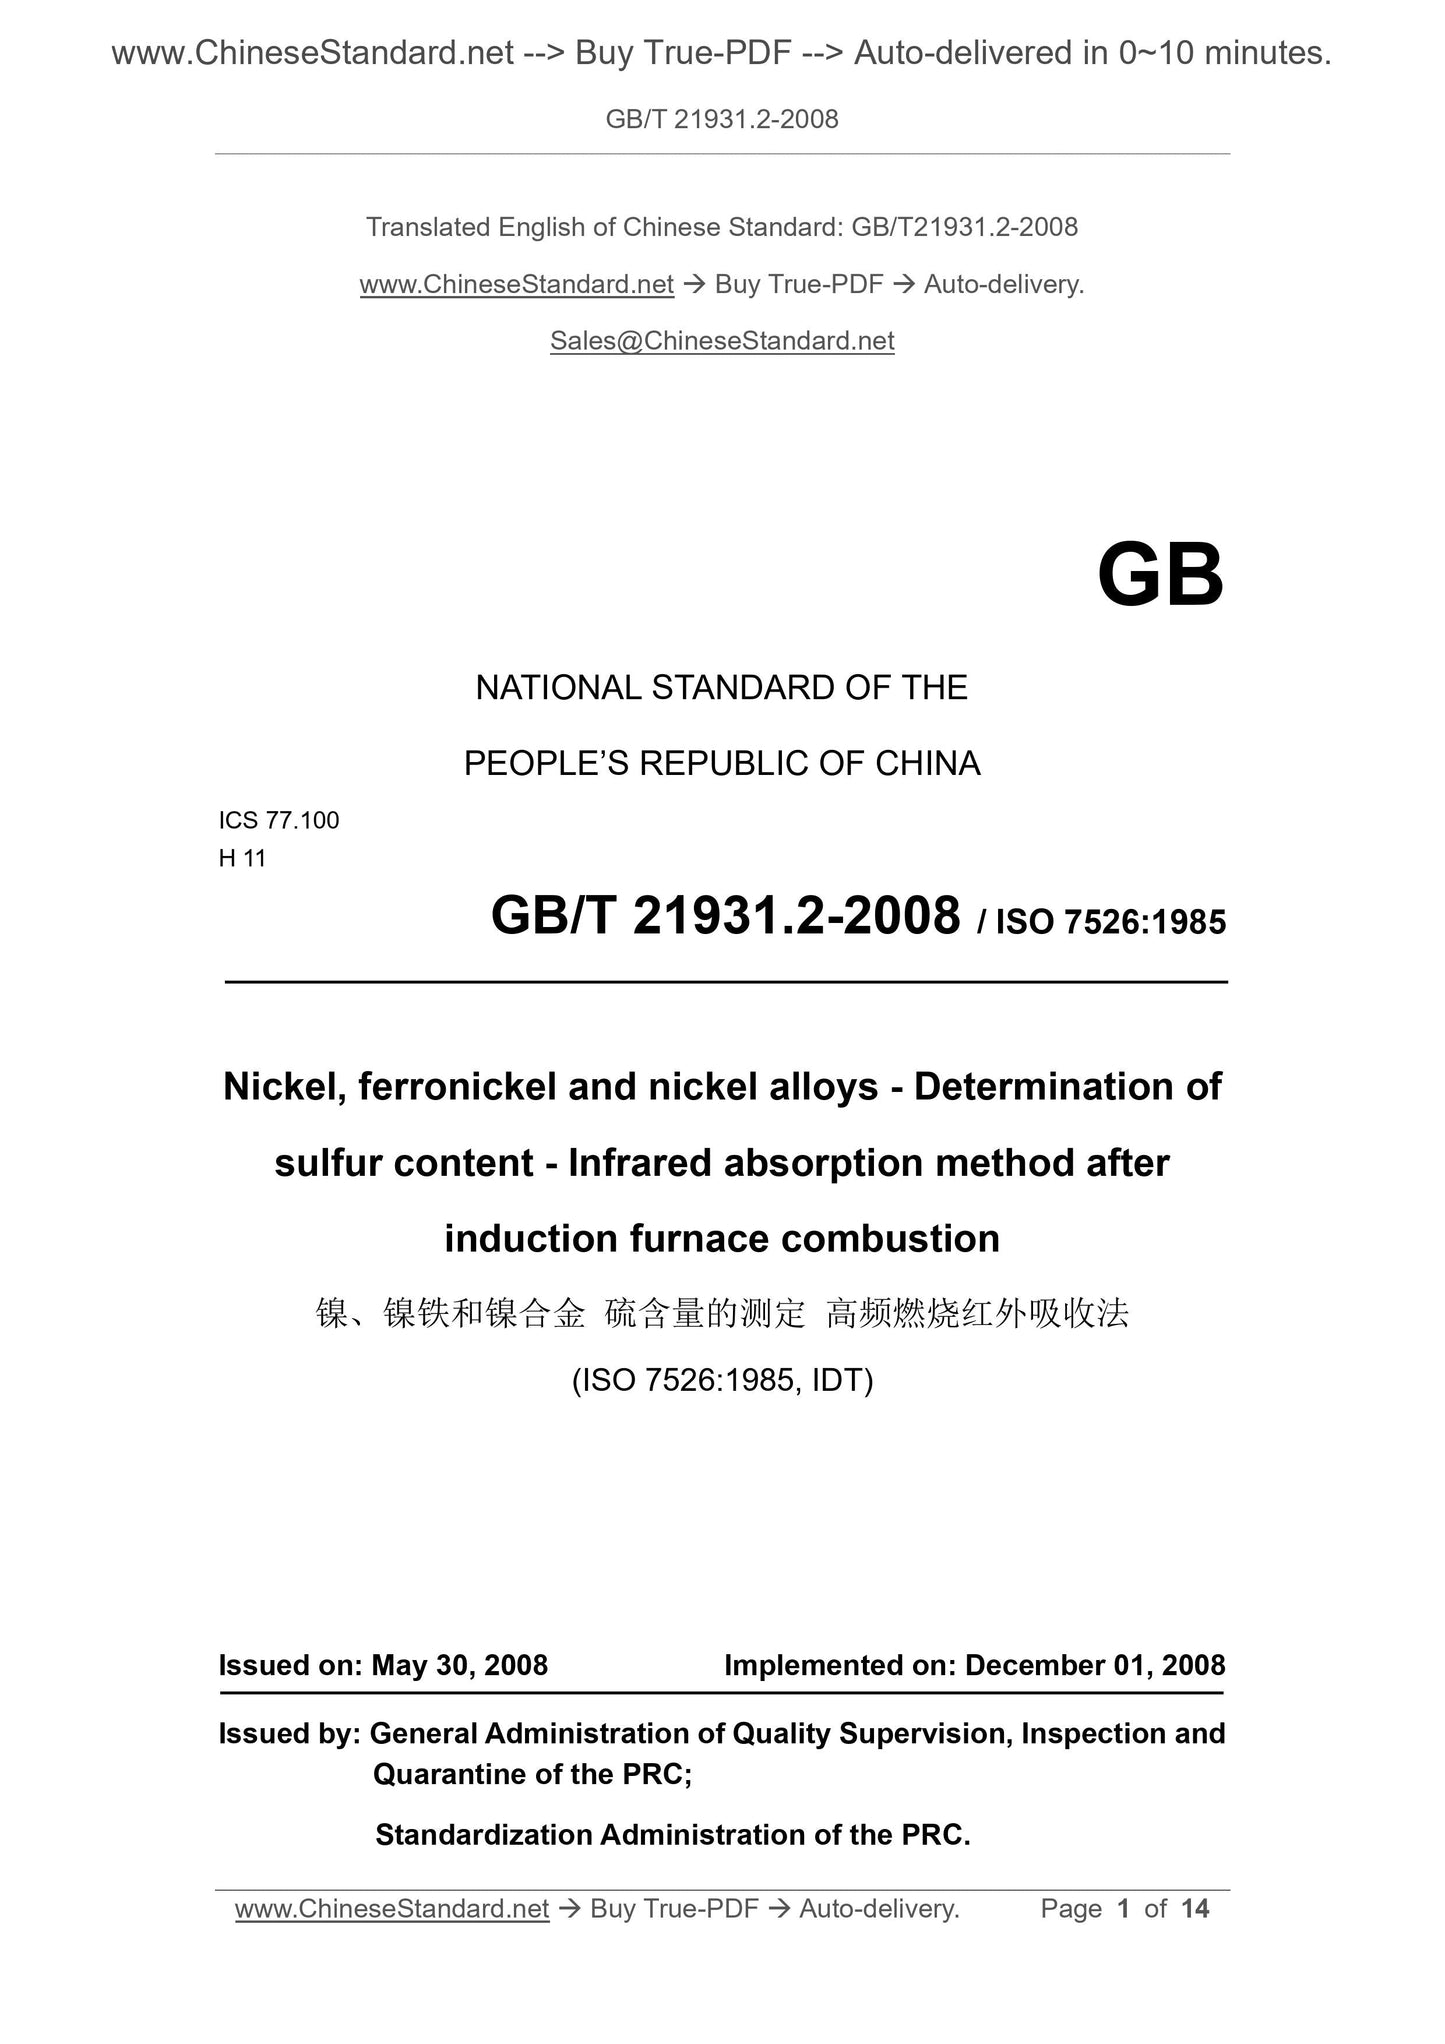 GB/T 21931.2-2008 Page 1